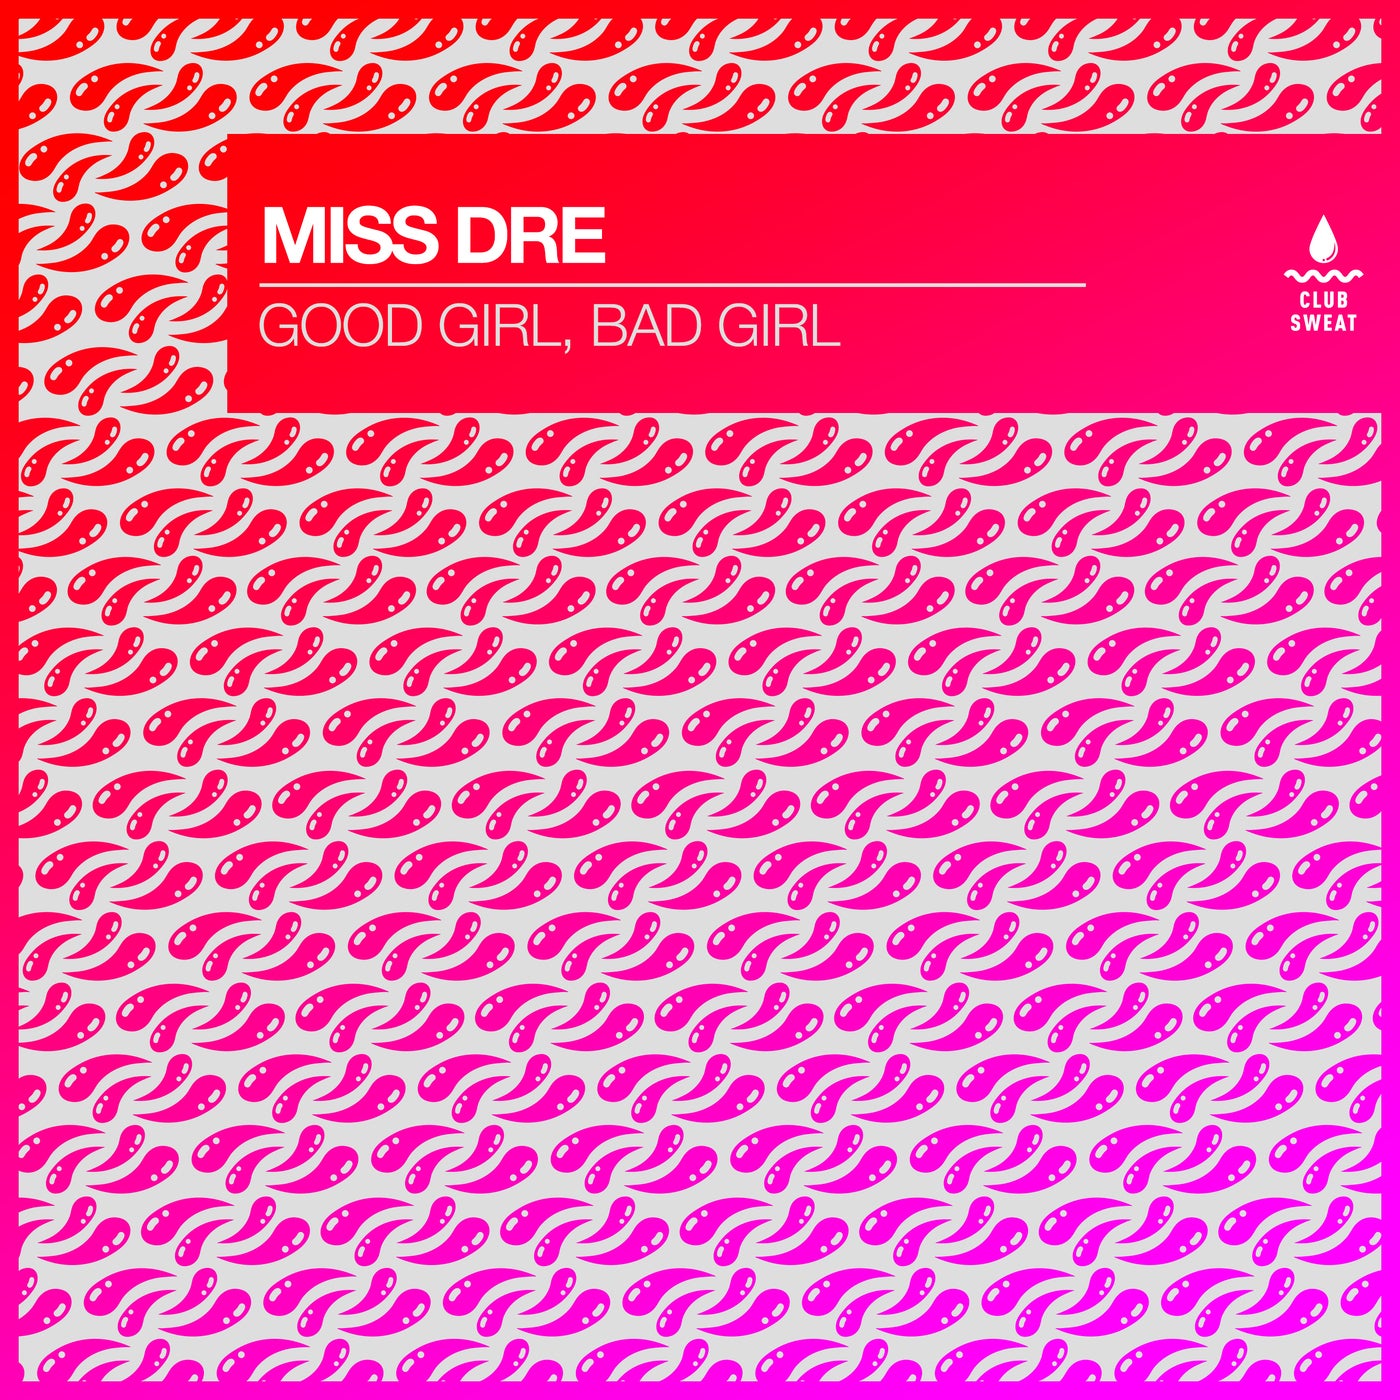 image cover: MISS DRE - Good Girl, Bad Girl (Extended Mix) on Club Sweat